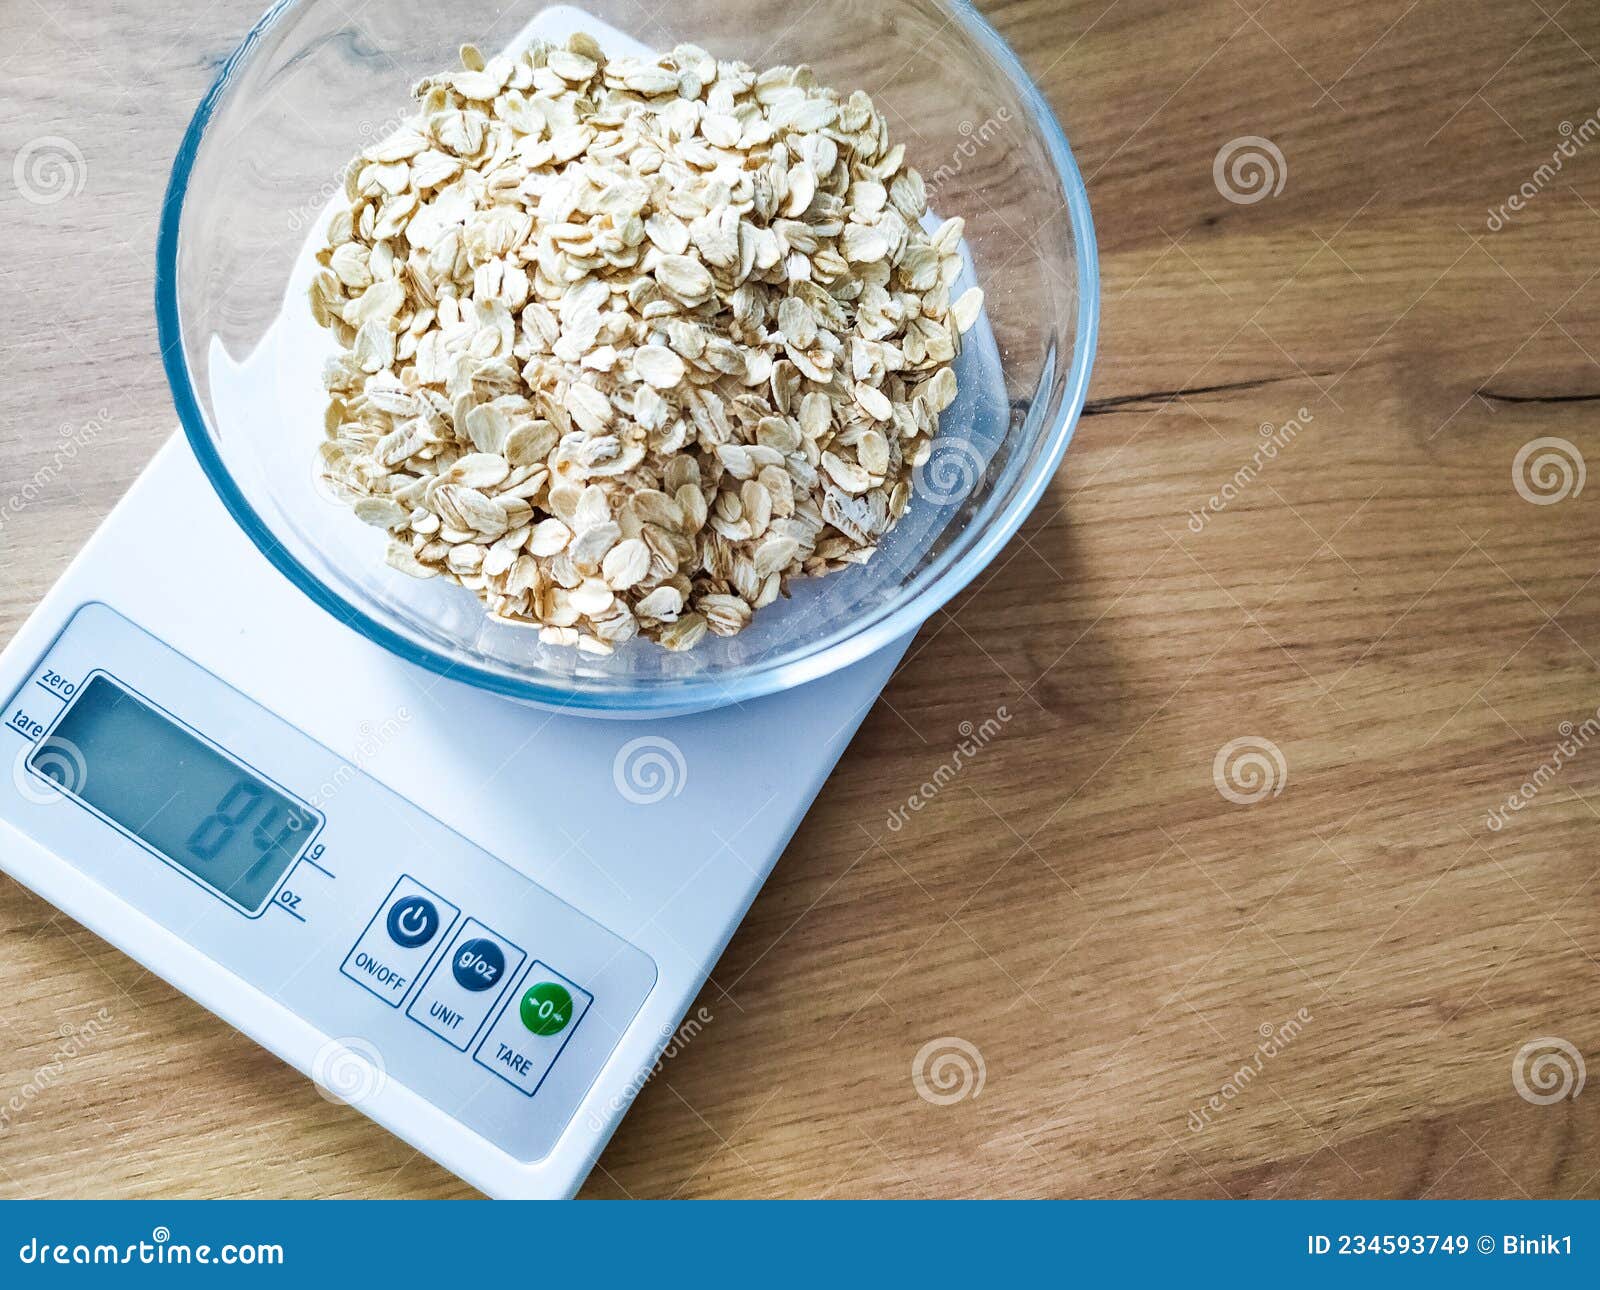 https://thumbs.dreamstime.com/z/grits-weighing-glass-bowl-kitchen-scales-wooden-table-oat-groats-electronic-234593749.jpg